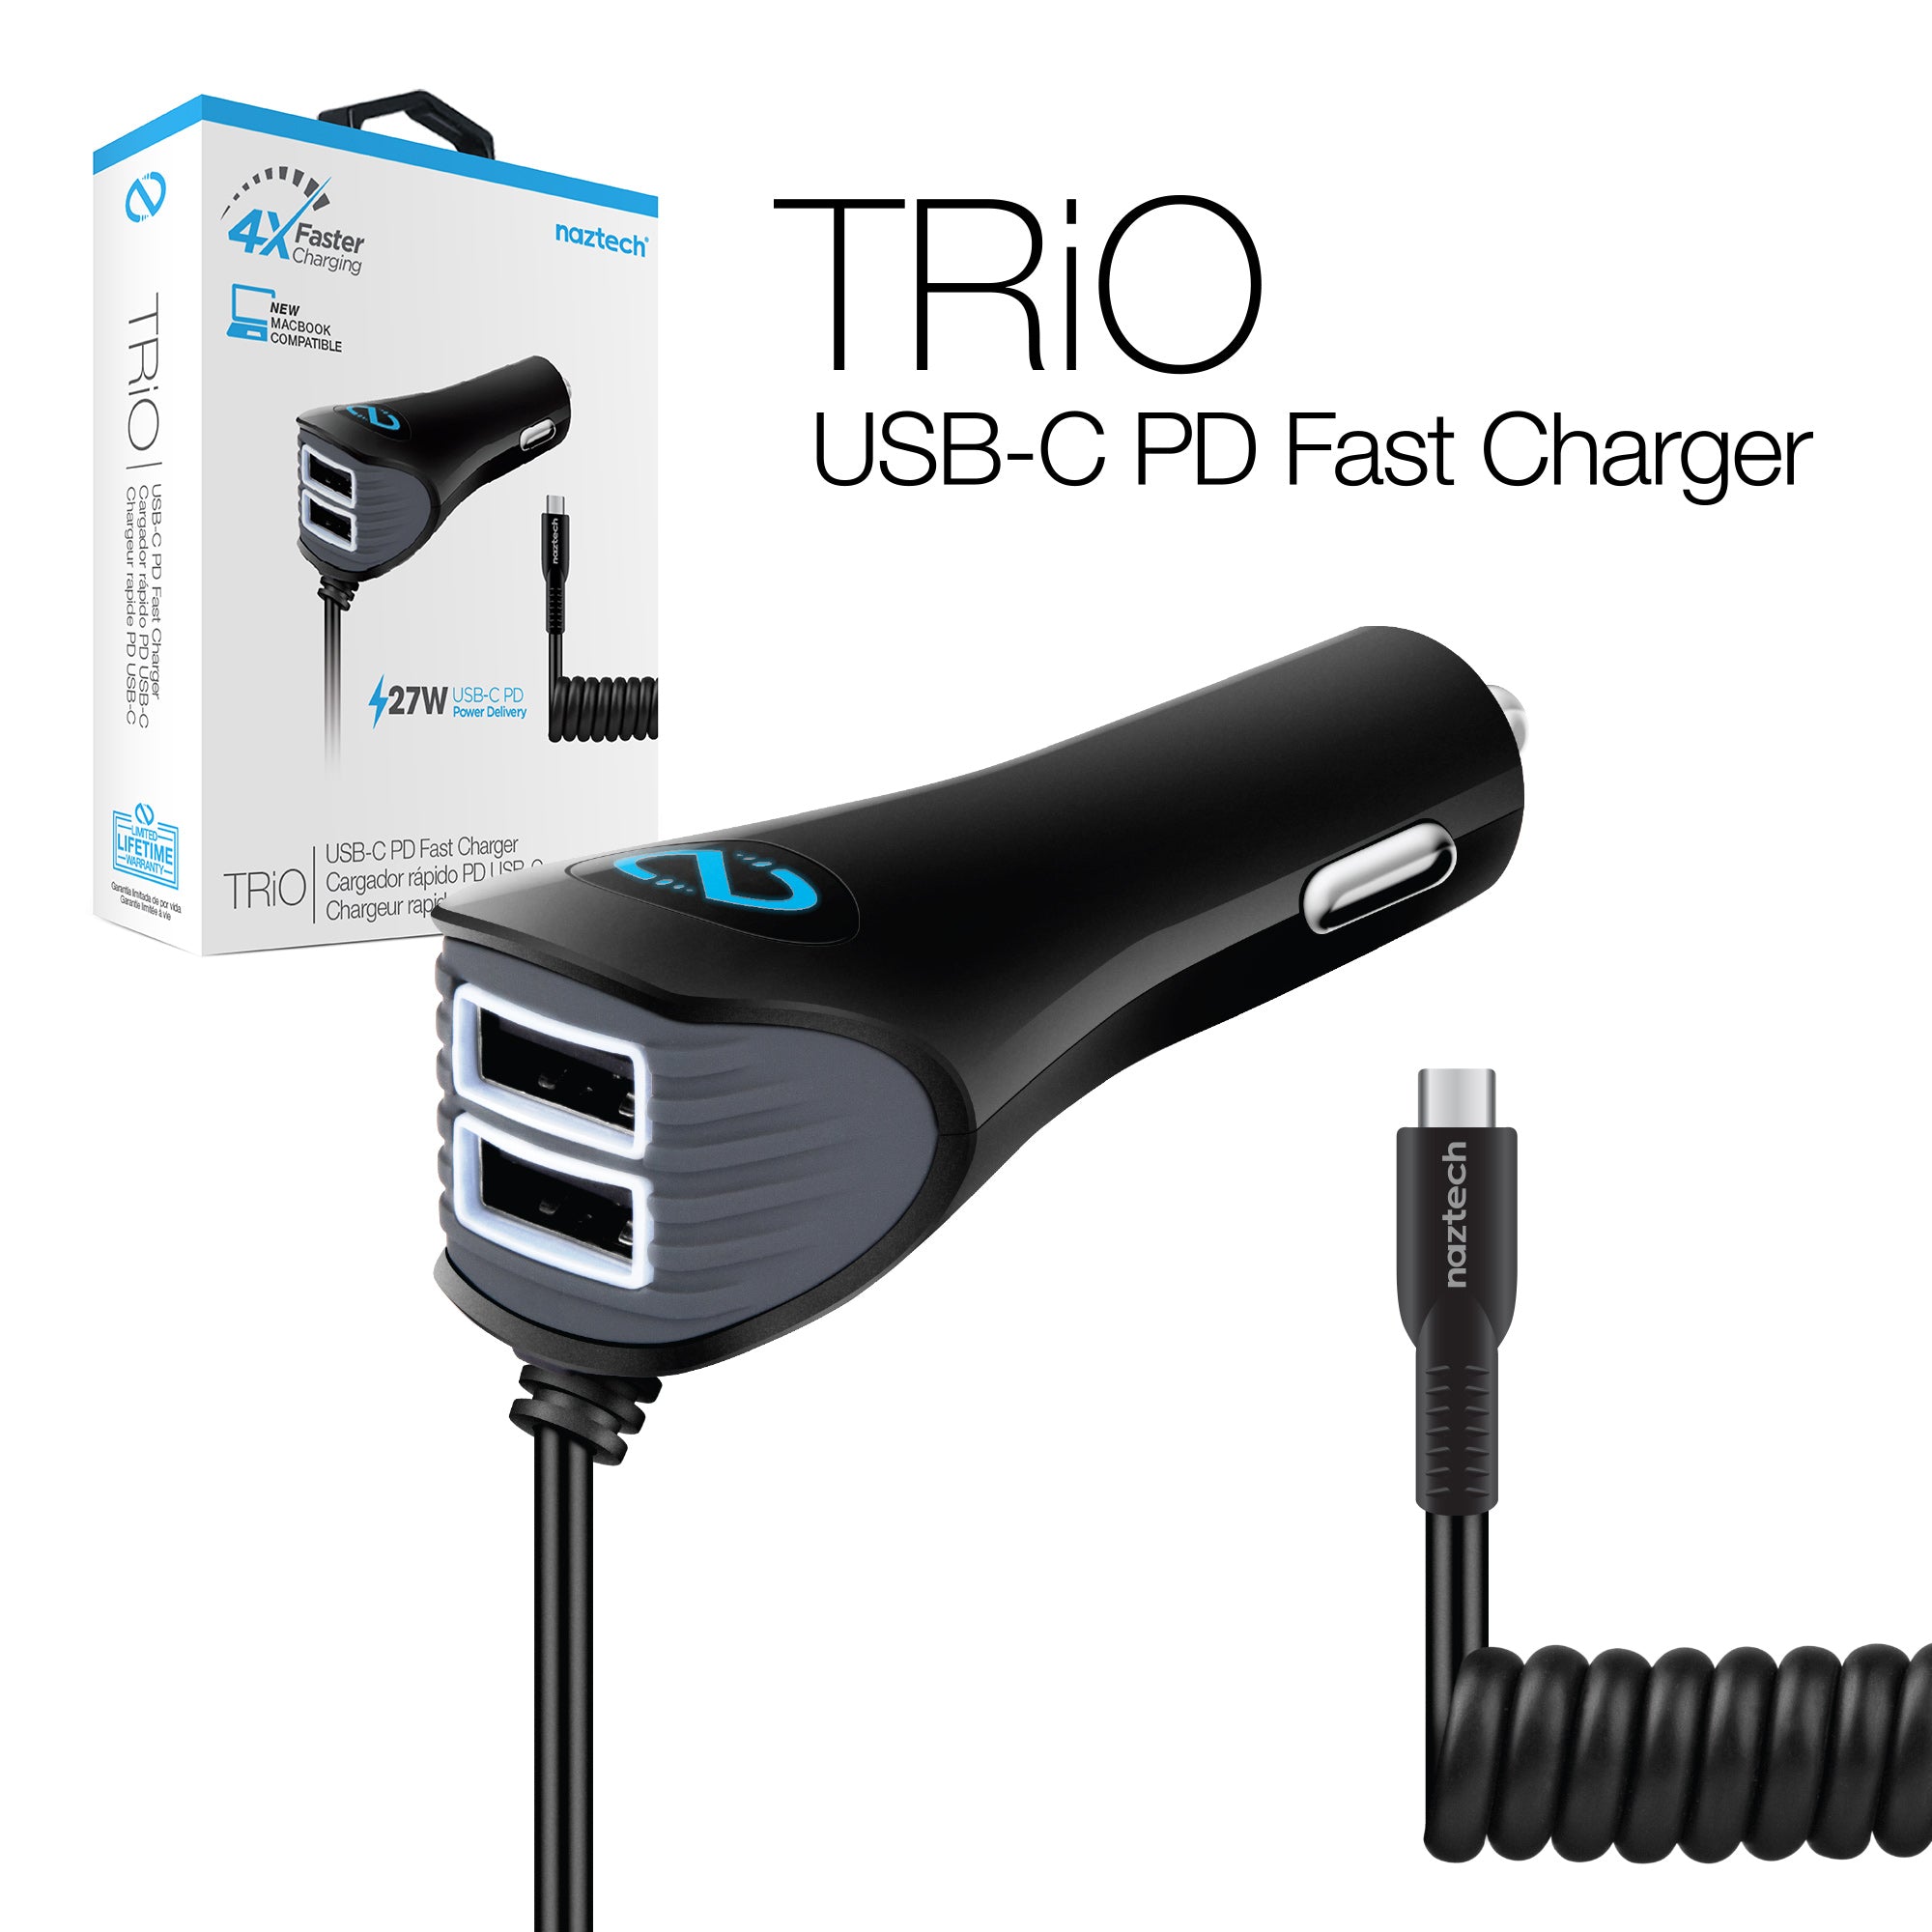 USB-C Car Charger with Power Delivery + Dual USB